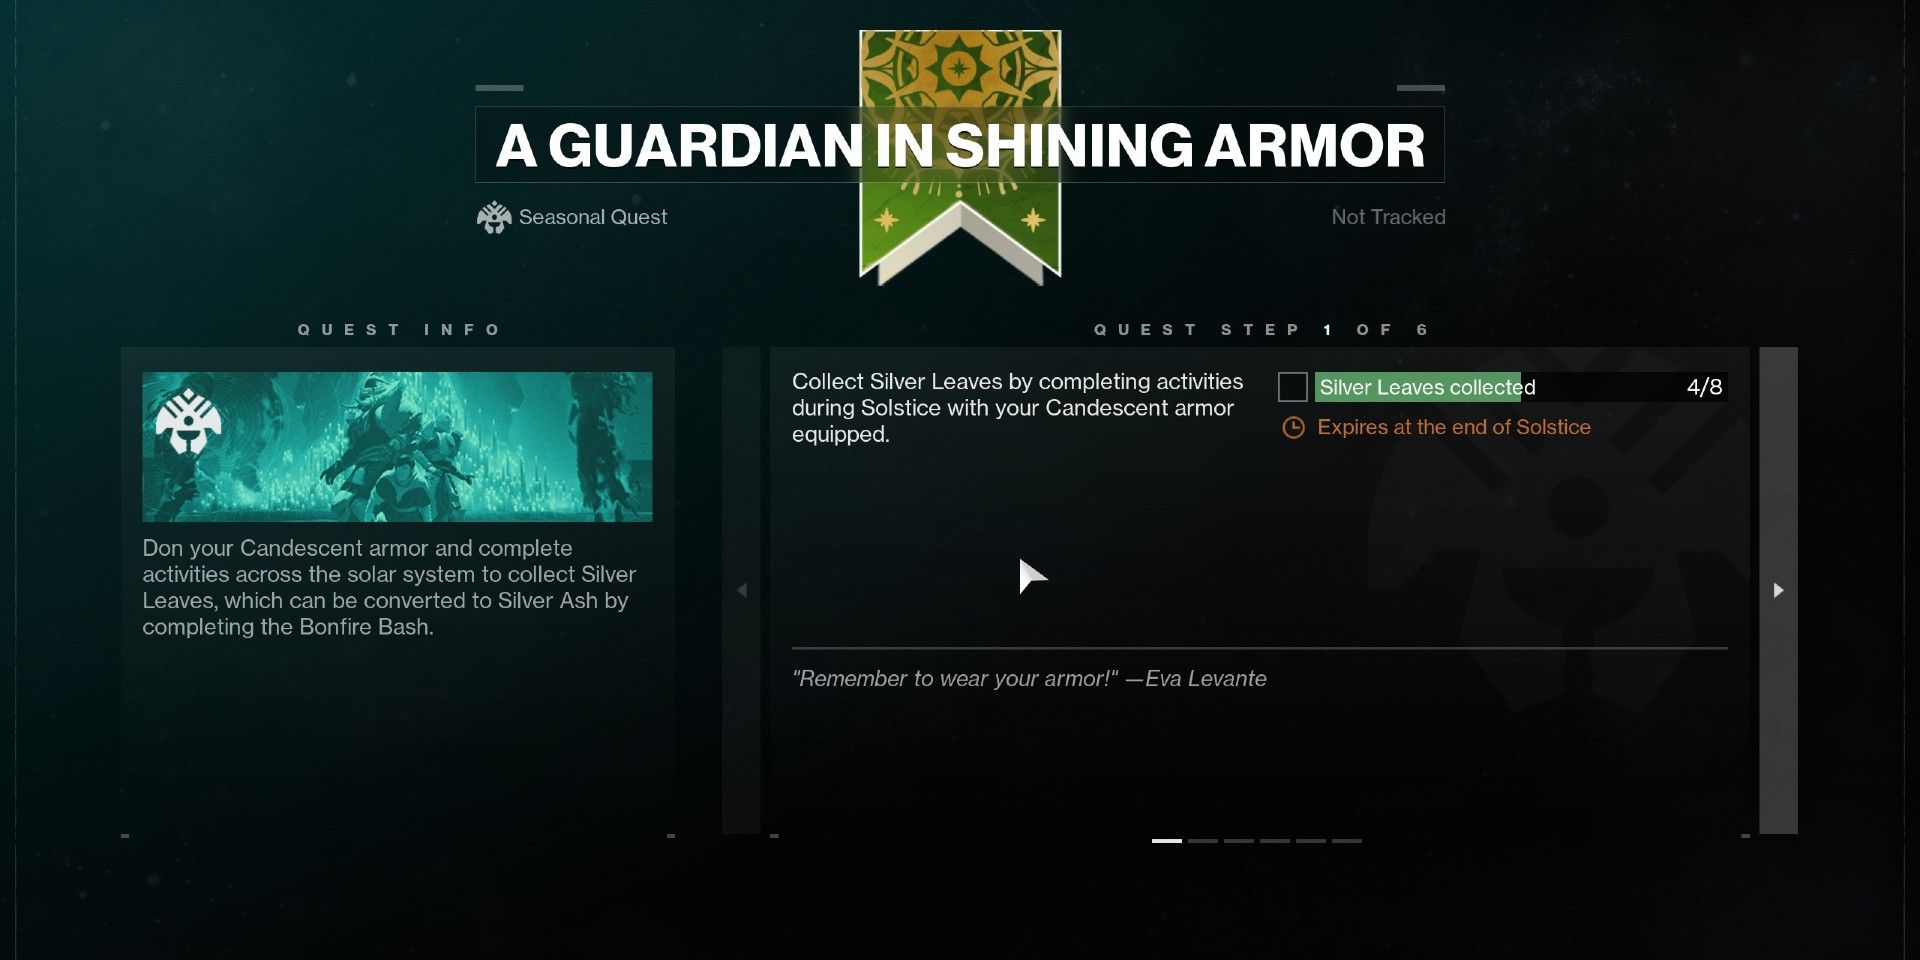 All A Guardian in Shining Armor Quest Steps In Destiny 2